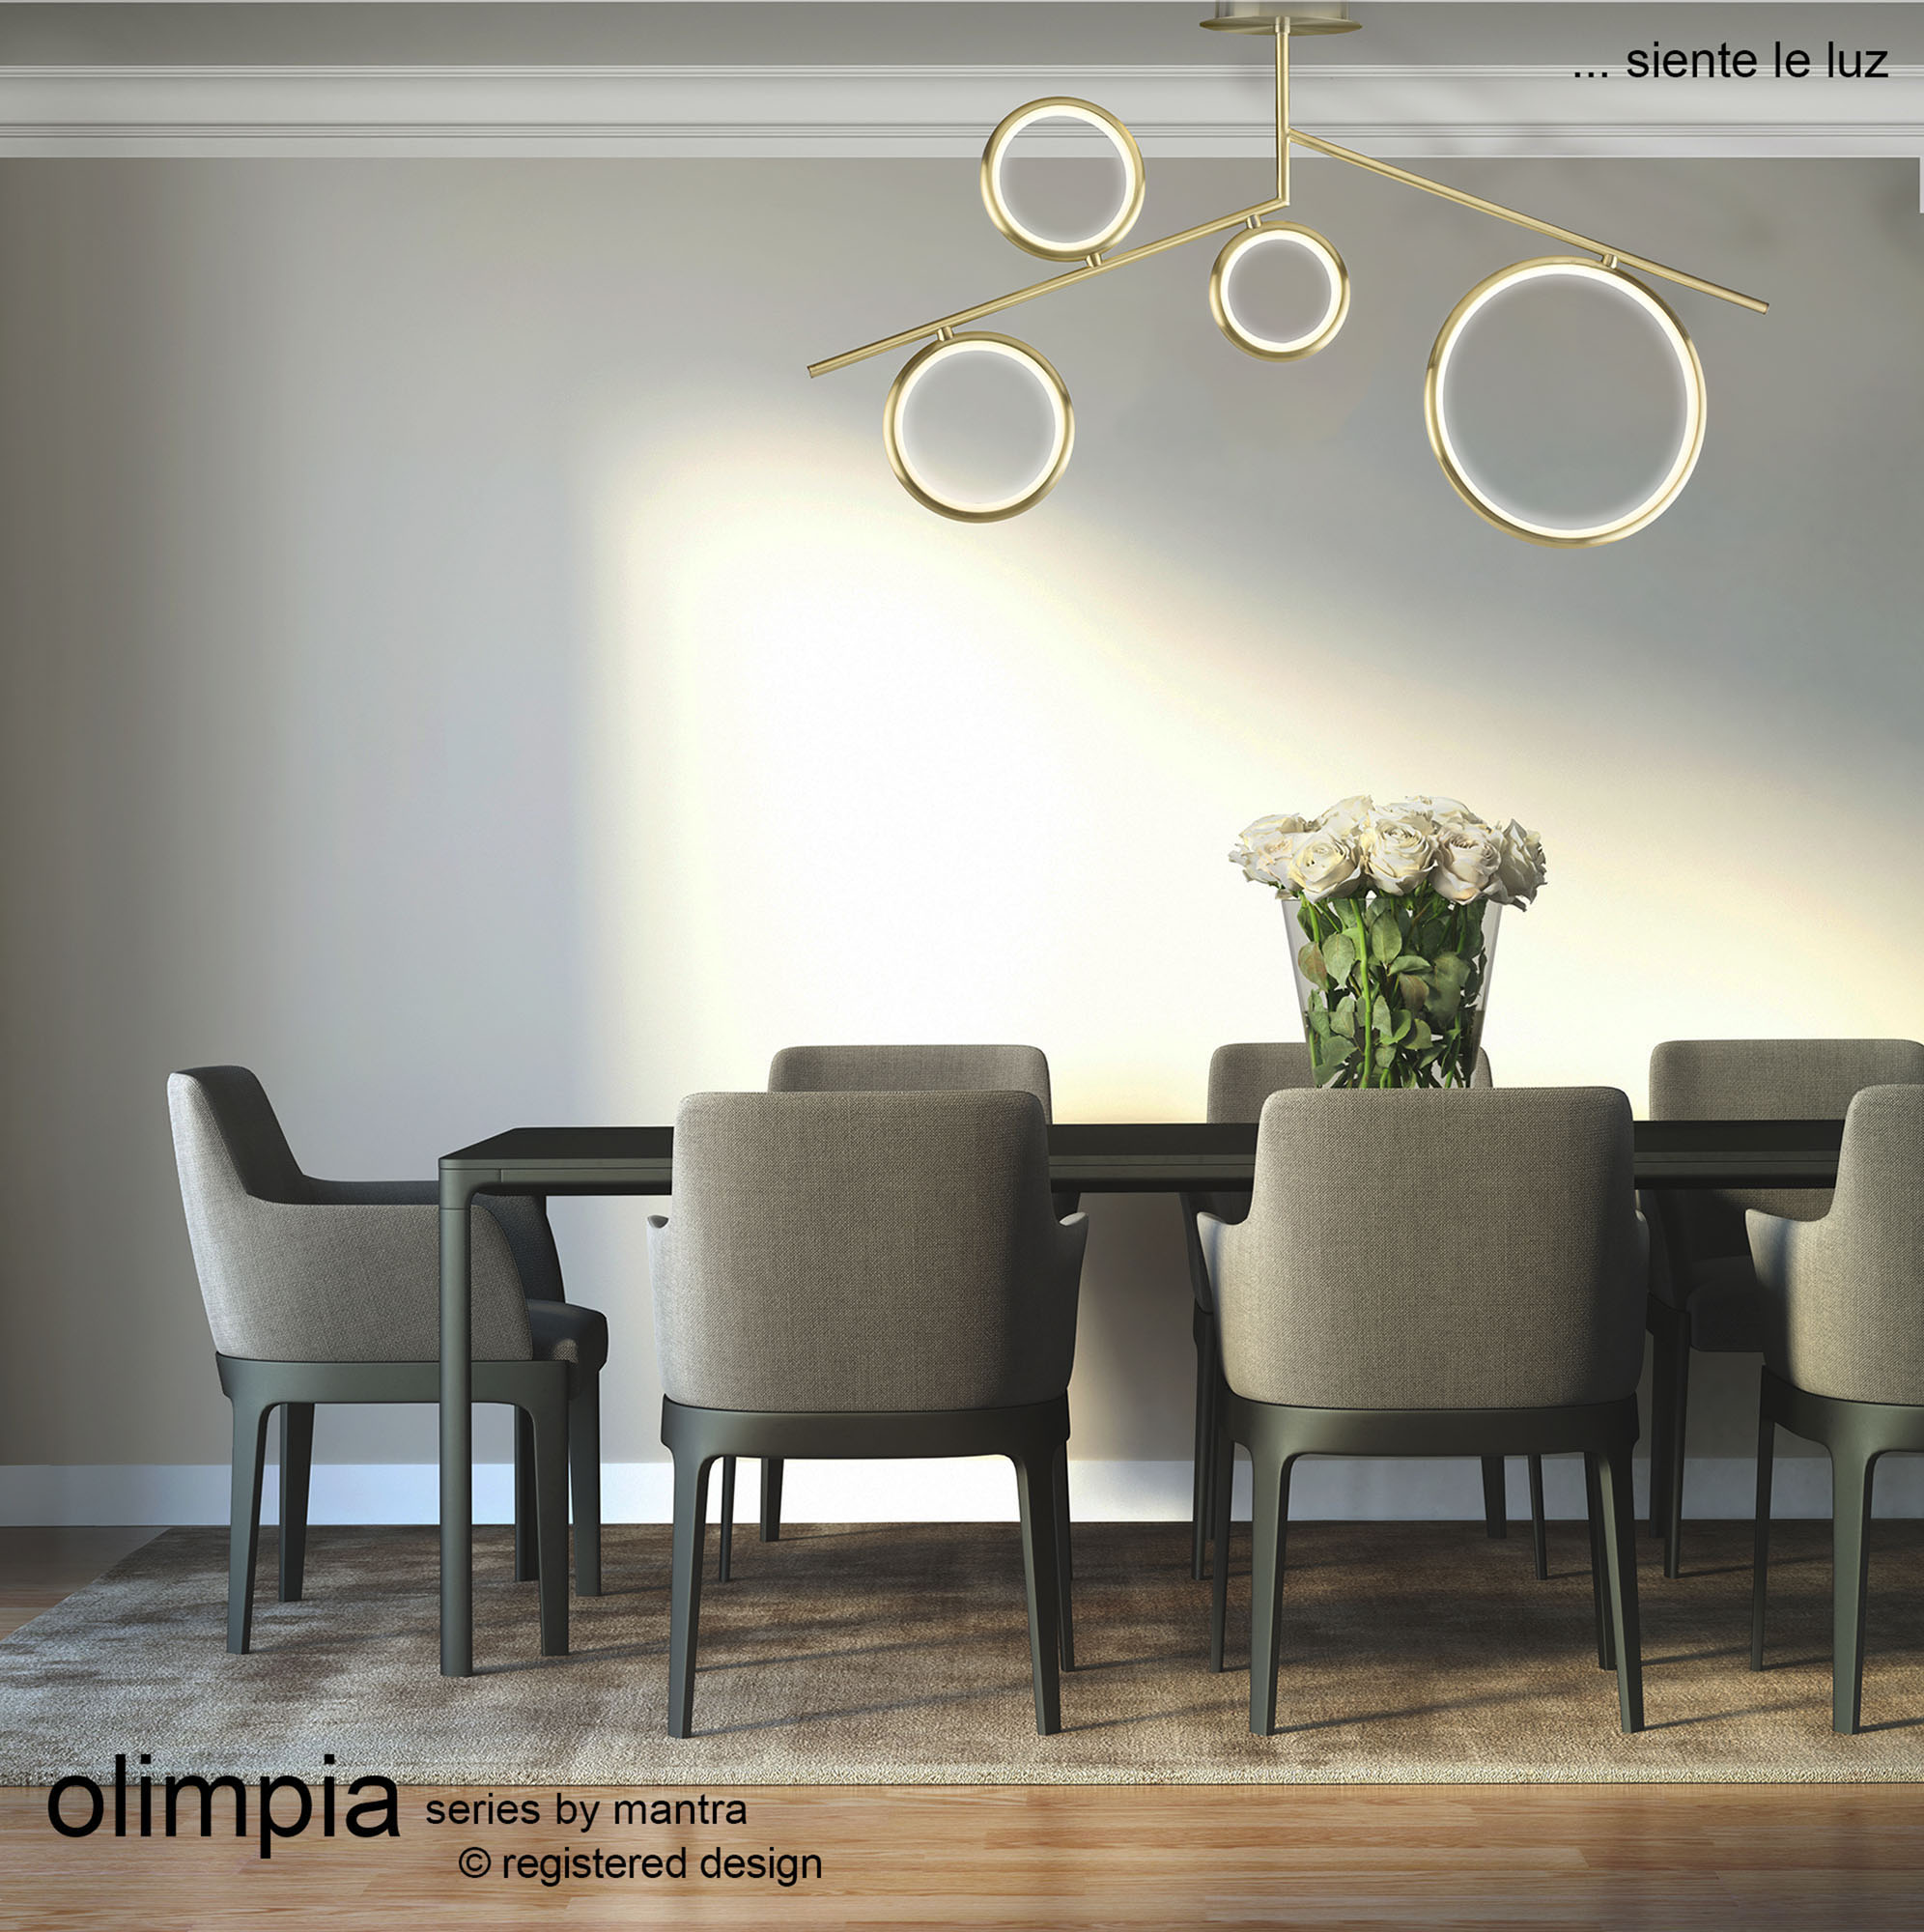 Olimpia Satin Gold Ceiling Lights Mantra Contemporary Ceiling Lights